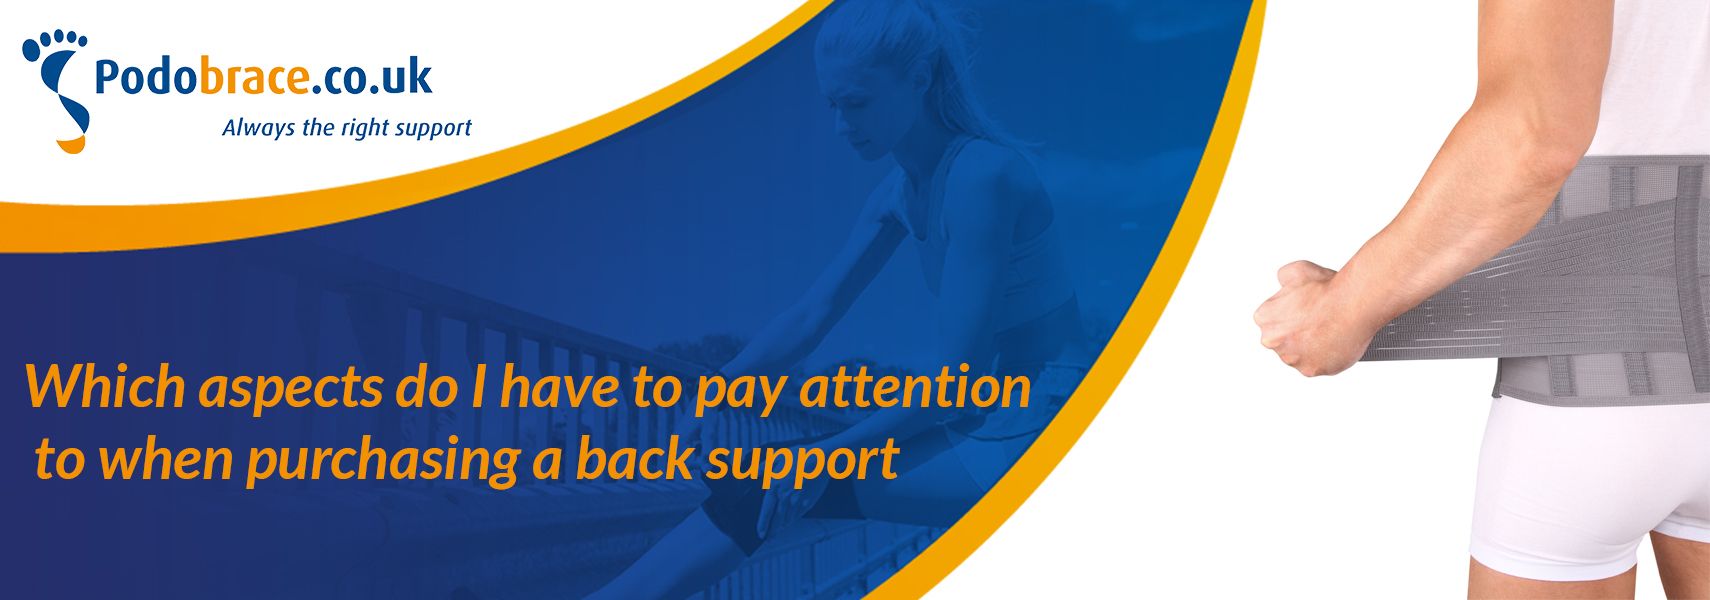 Which aspects do I have to pay attention to when purchasing a back support?